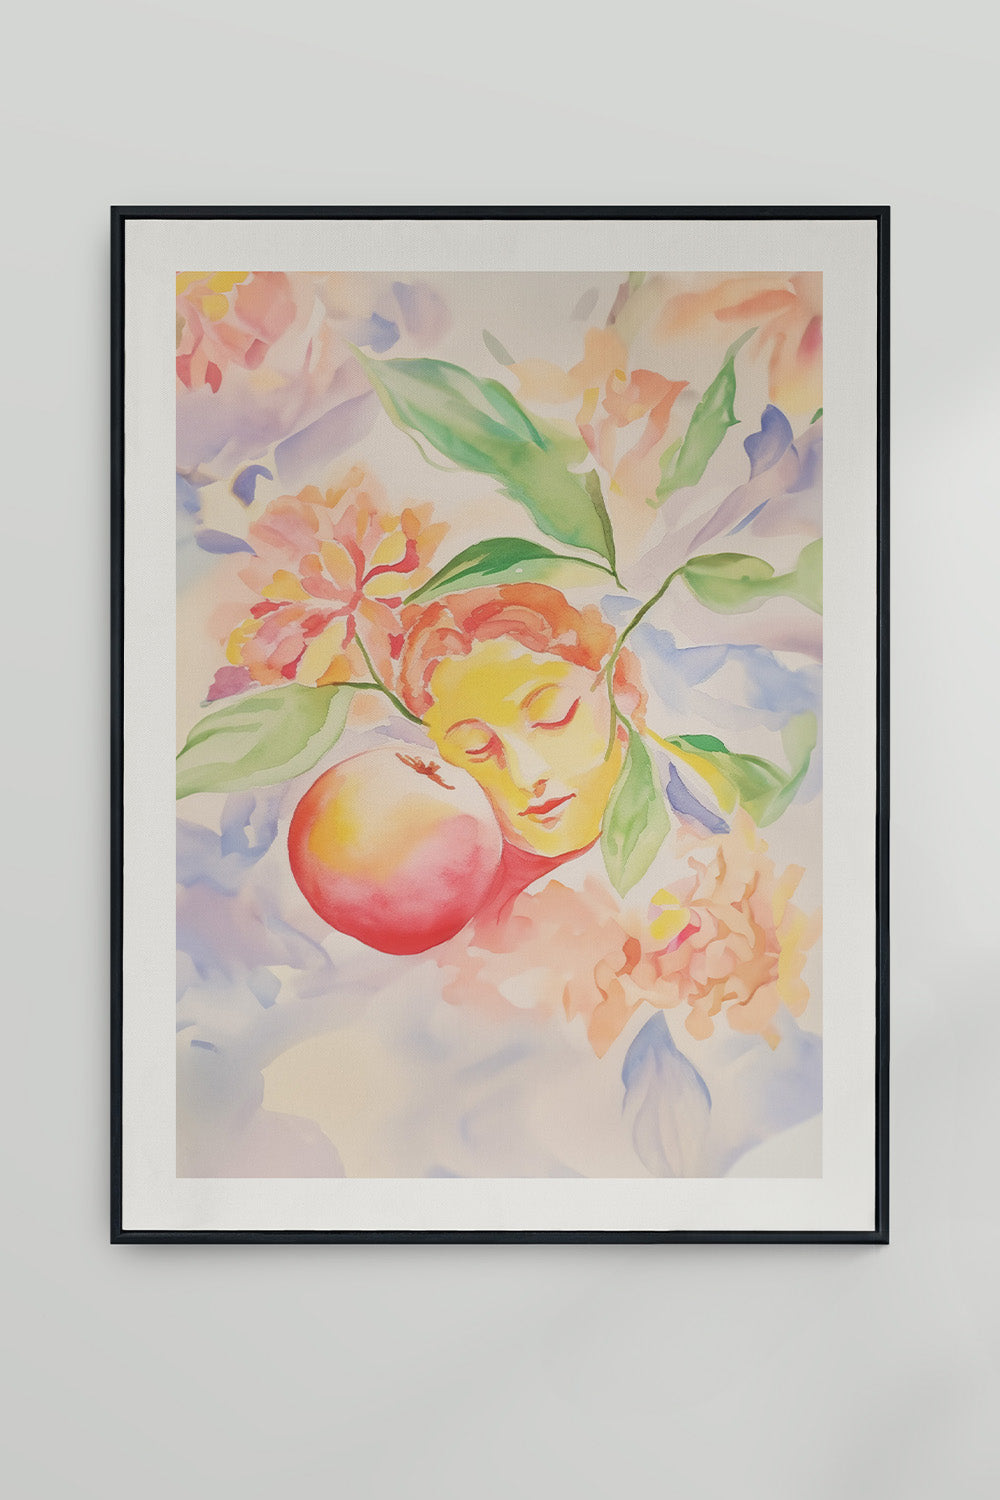 Dreamy watercolor portraits inspired by peaches - Peach Petals Art Prints.